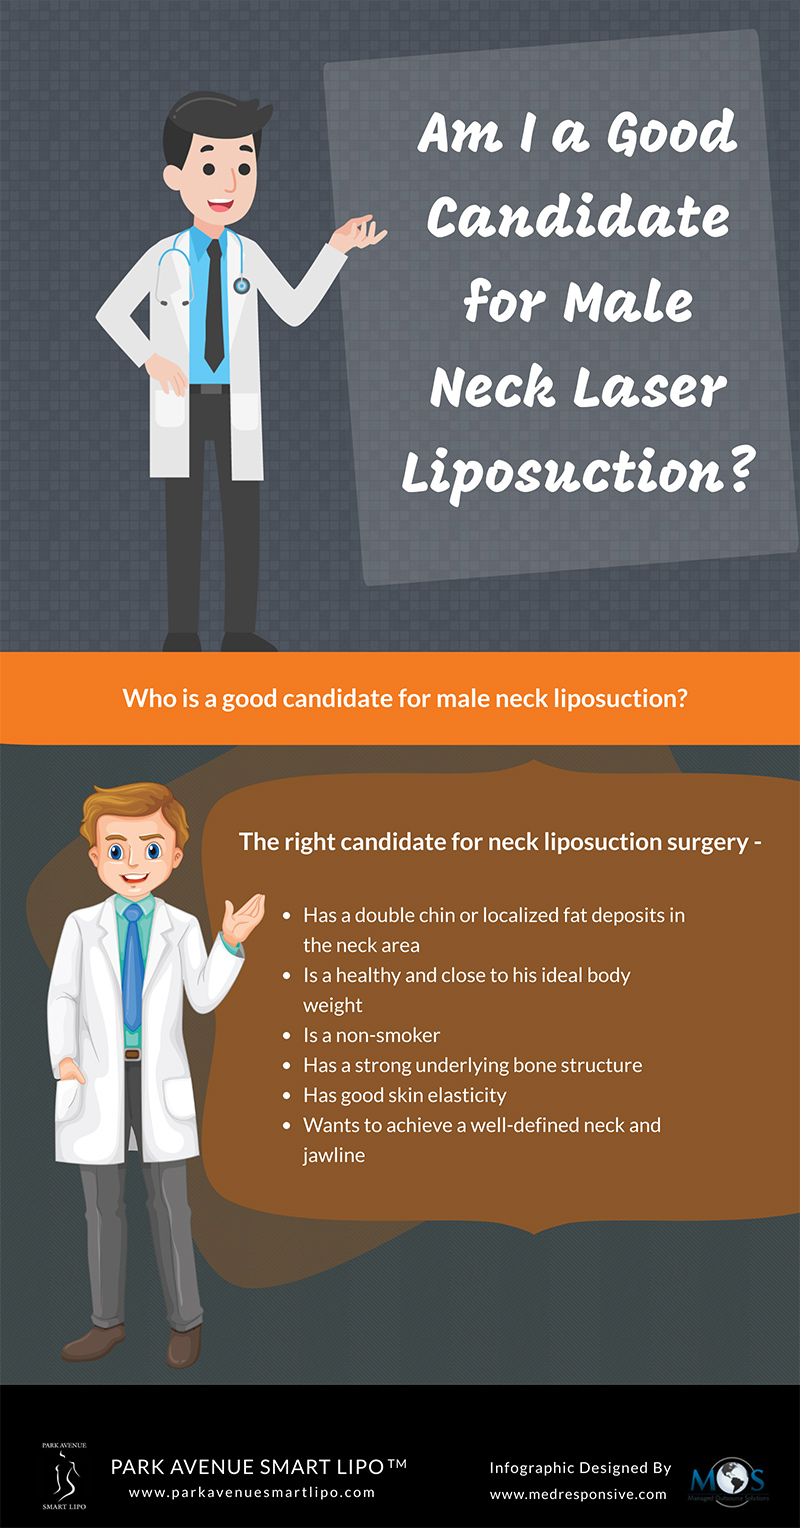 Am I A Good Candidate For Male Neck Laser Liposuction?